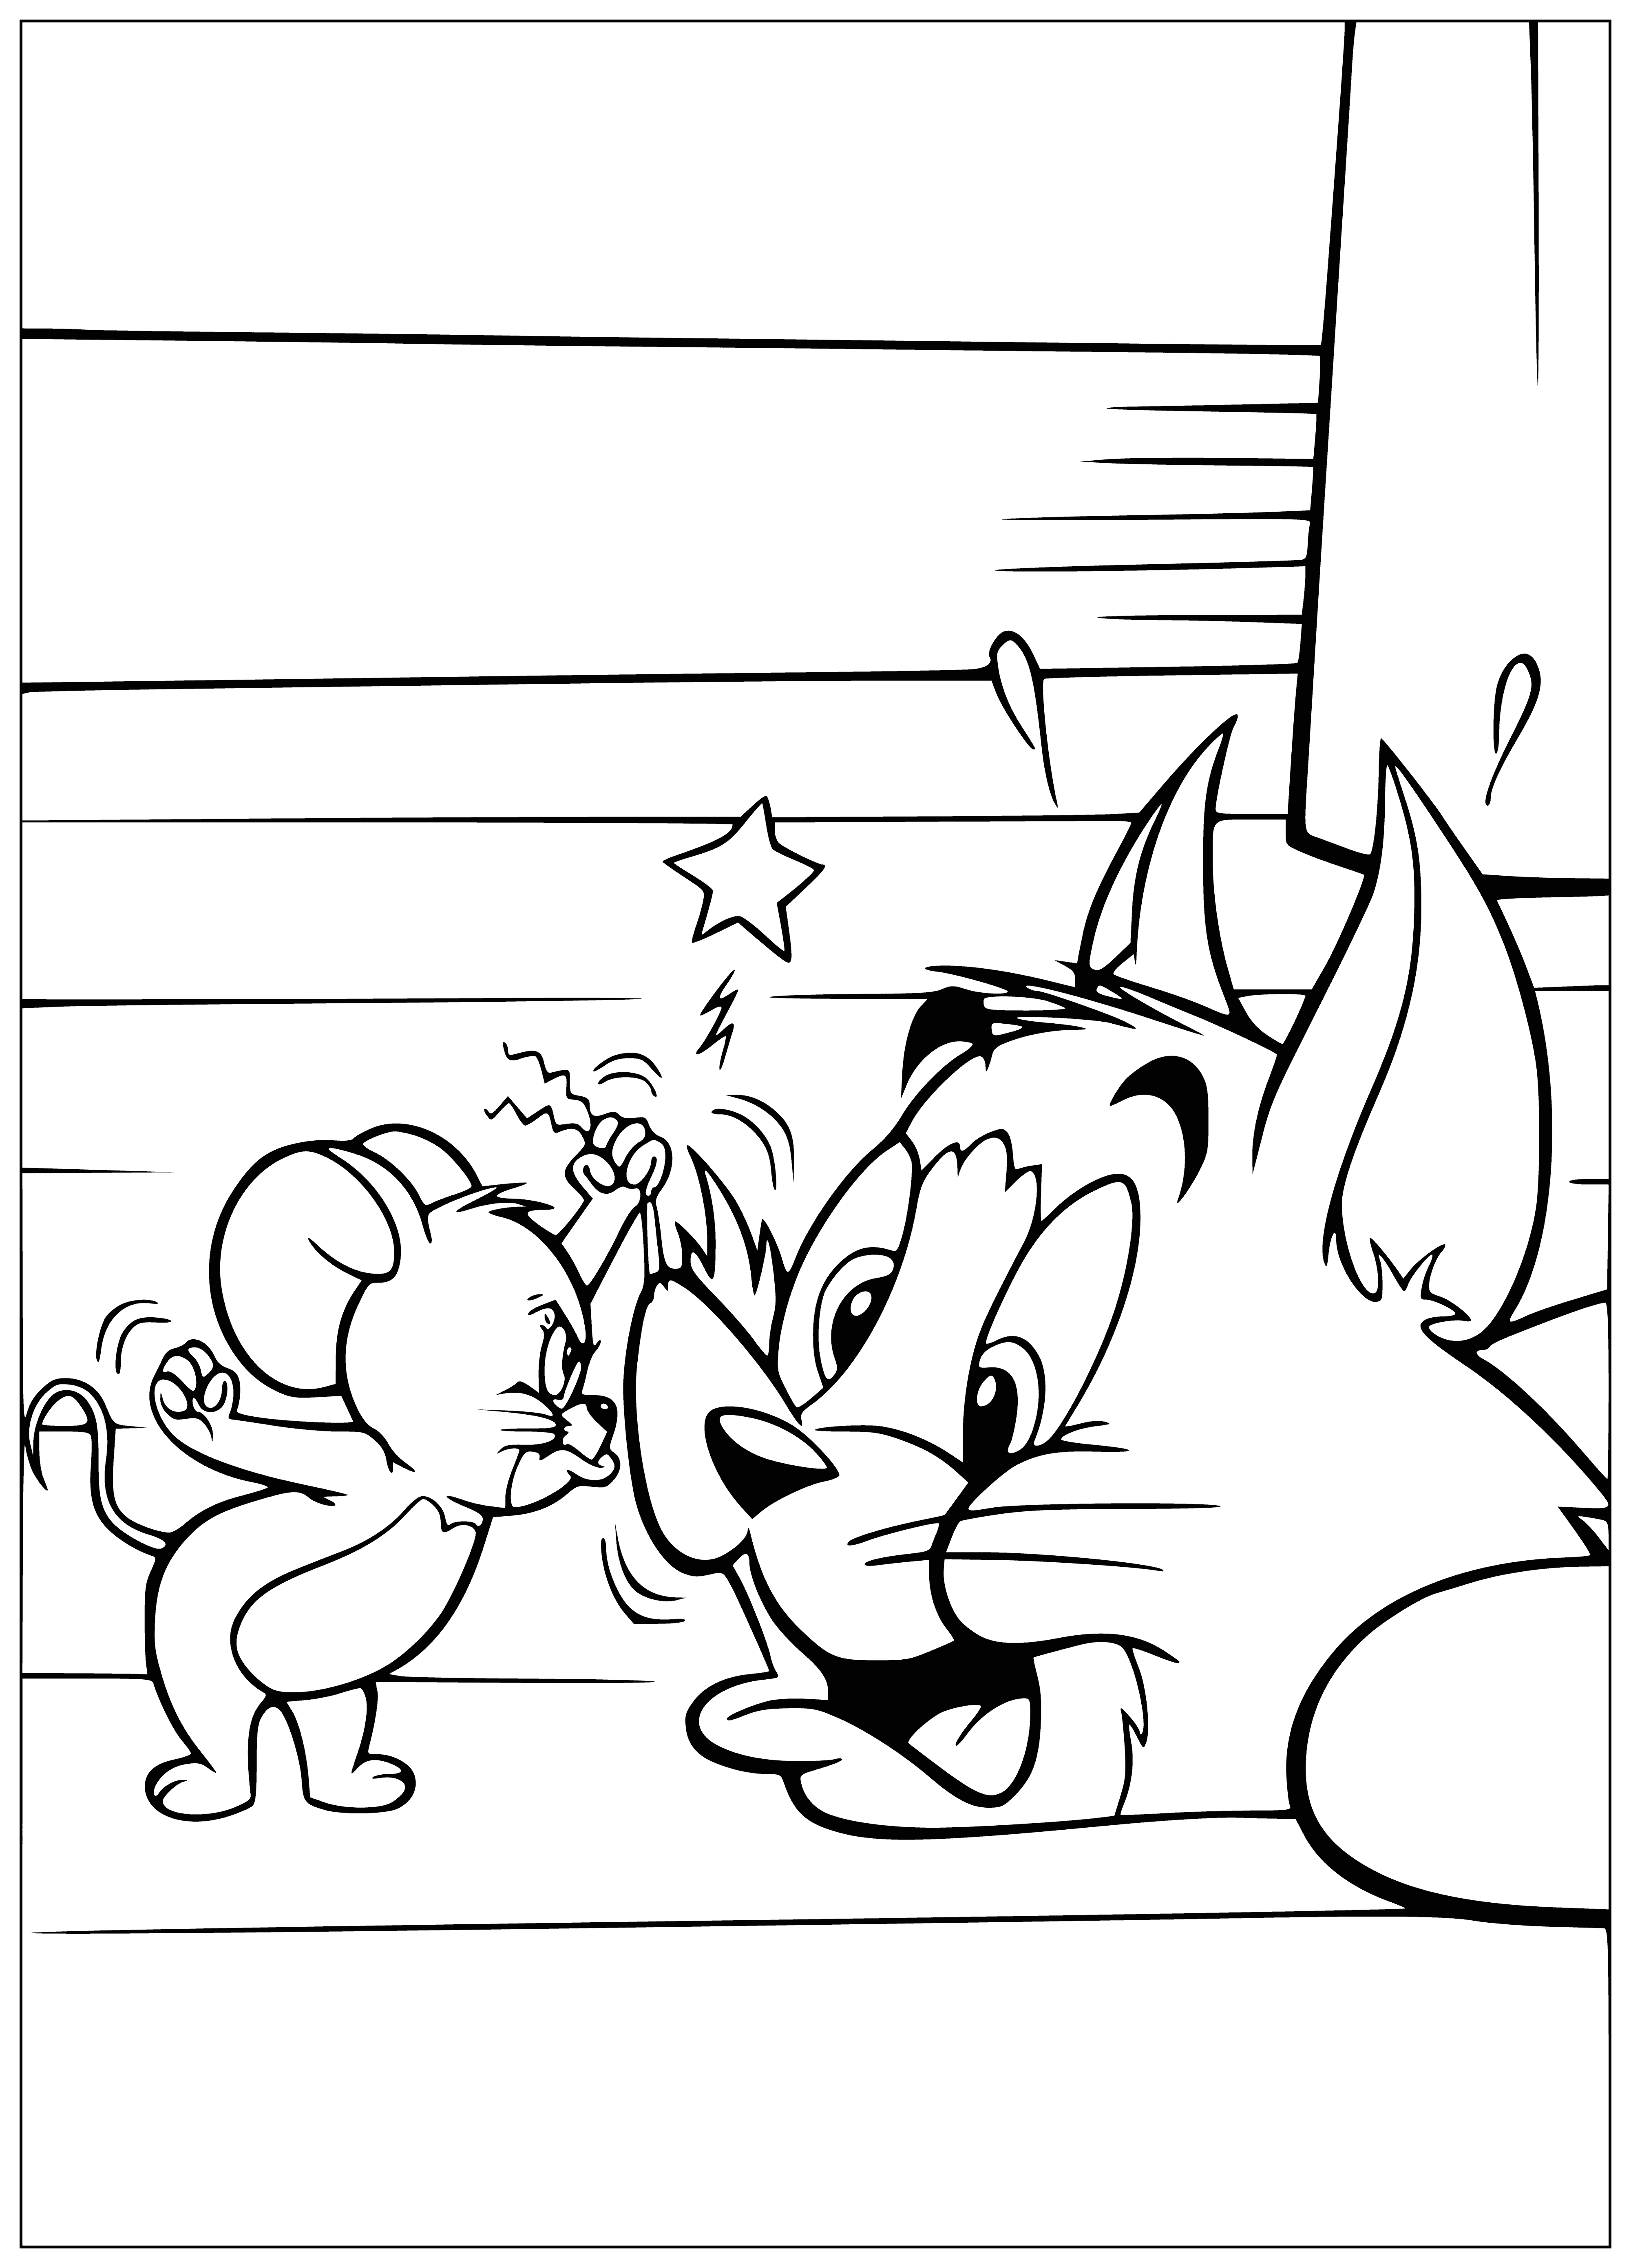 coloring page: Tom and Jerry, a cat and mouse pair of cartoon characters, are running in this coloring page with Tom chasing Jerry.